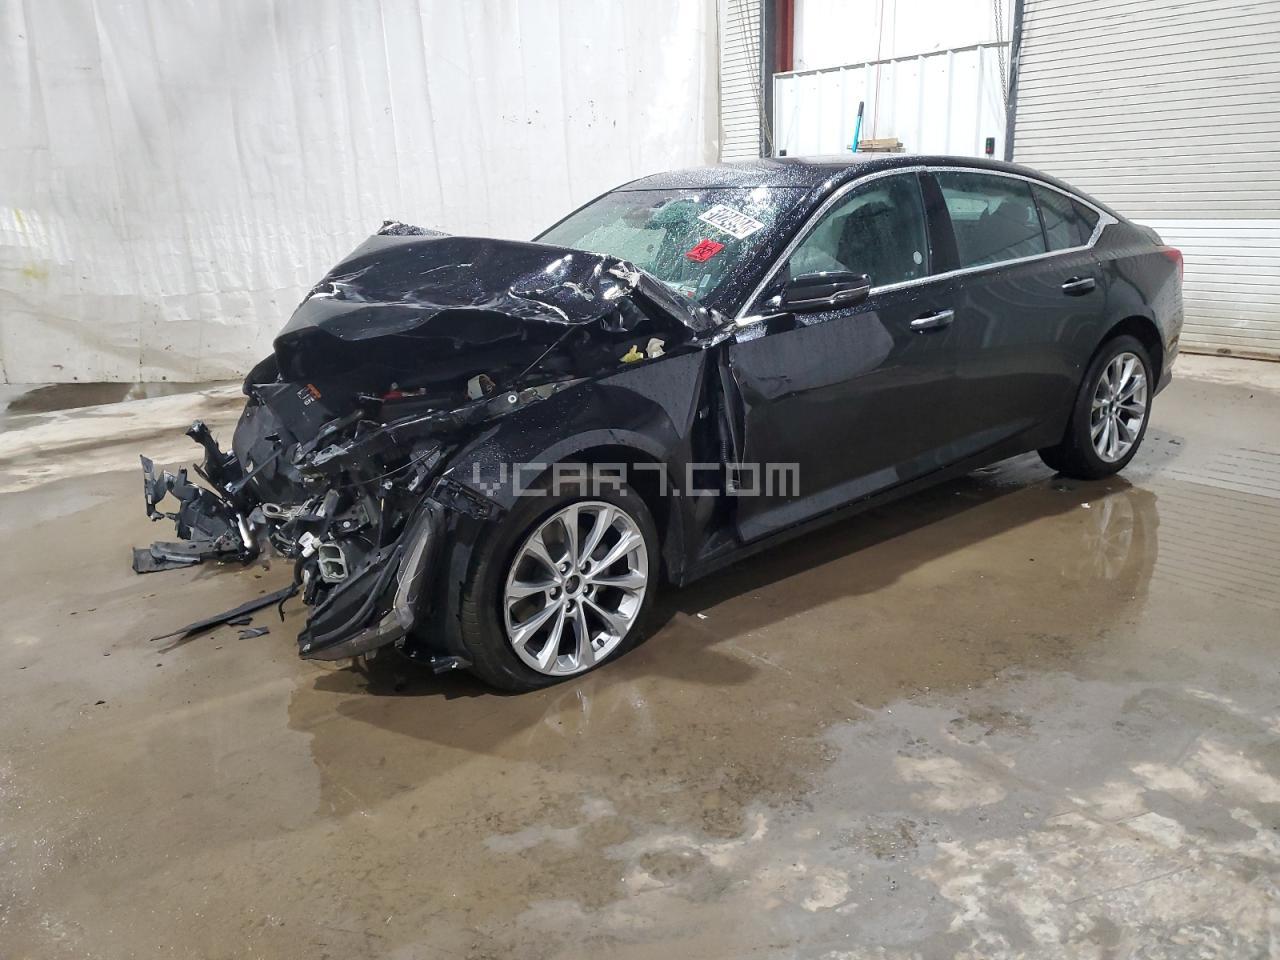 VIN: 1G6DS5RK6P0147398 - cadillac ct5